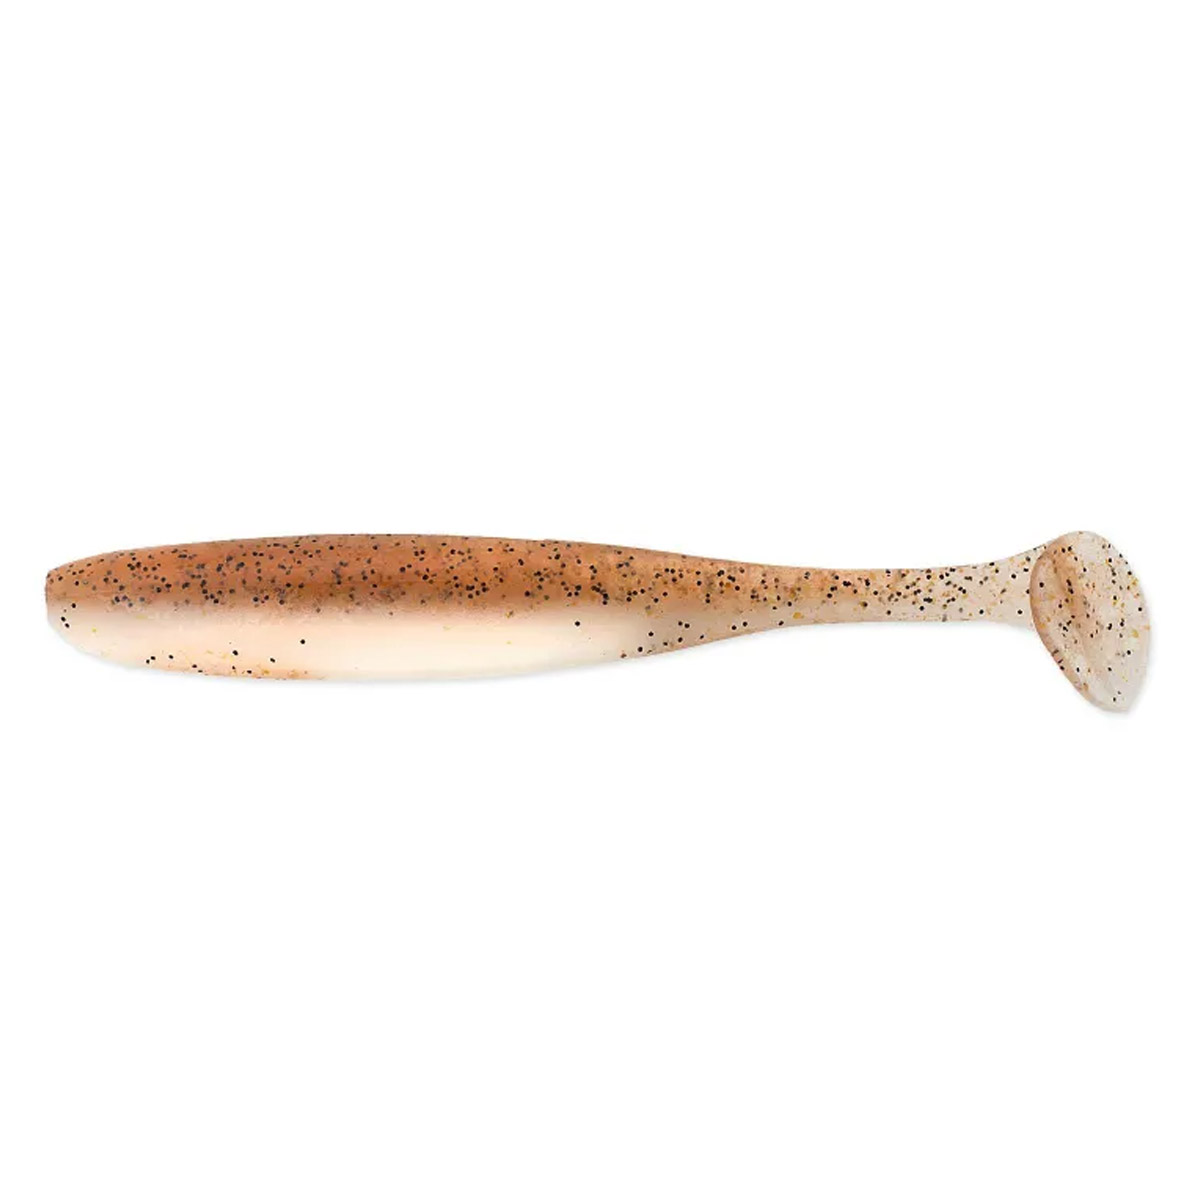 Keitech Easy Shiner 3,5 inch -  Natural Craw